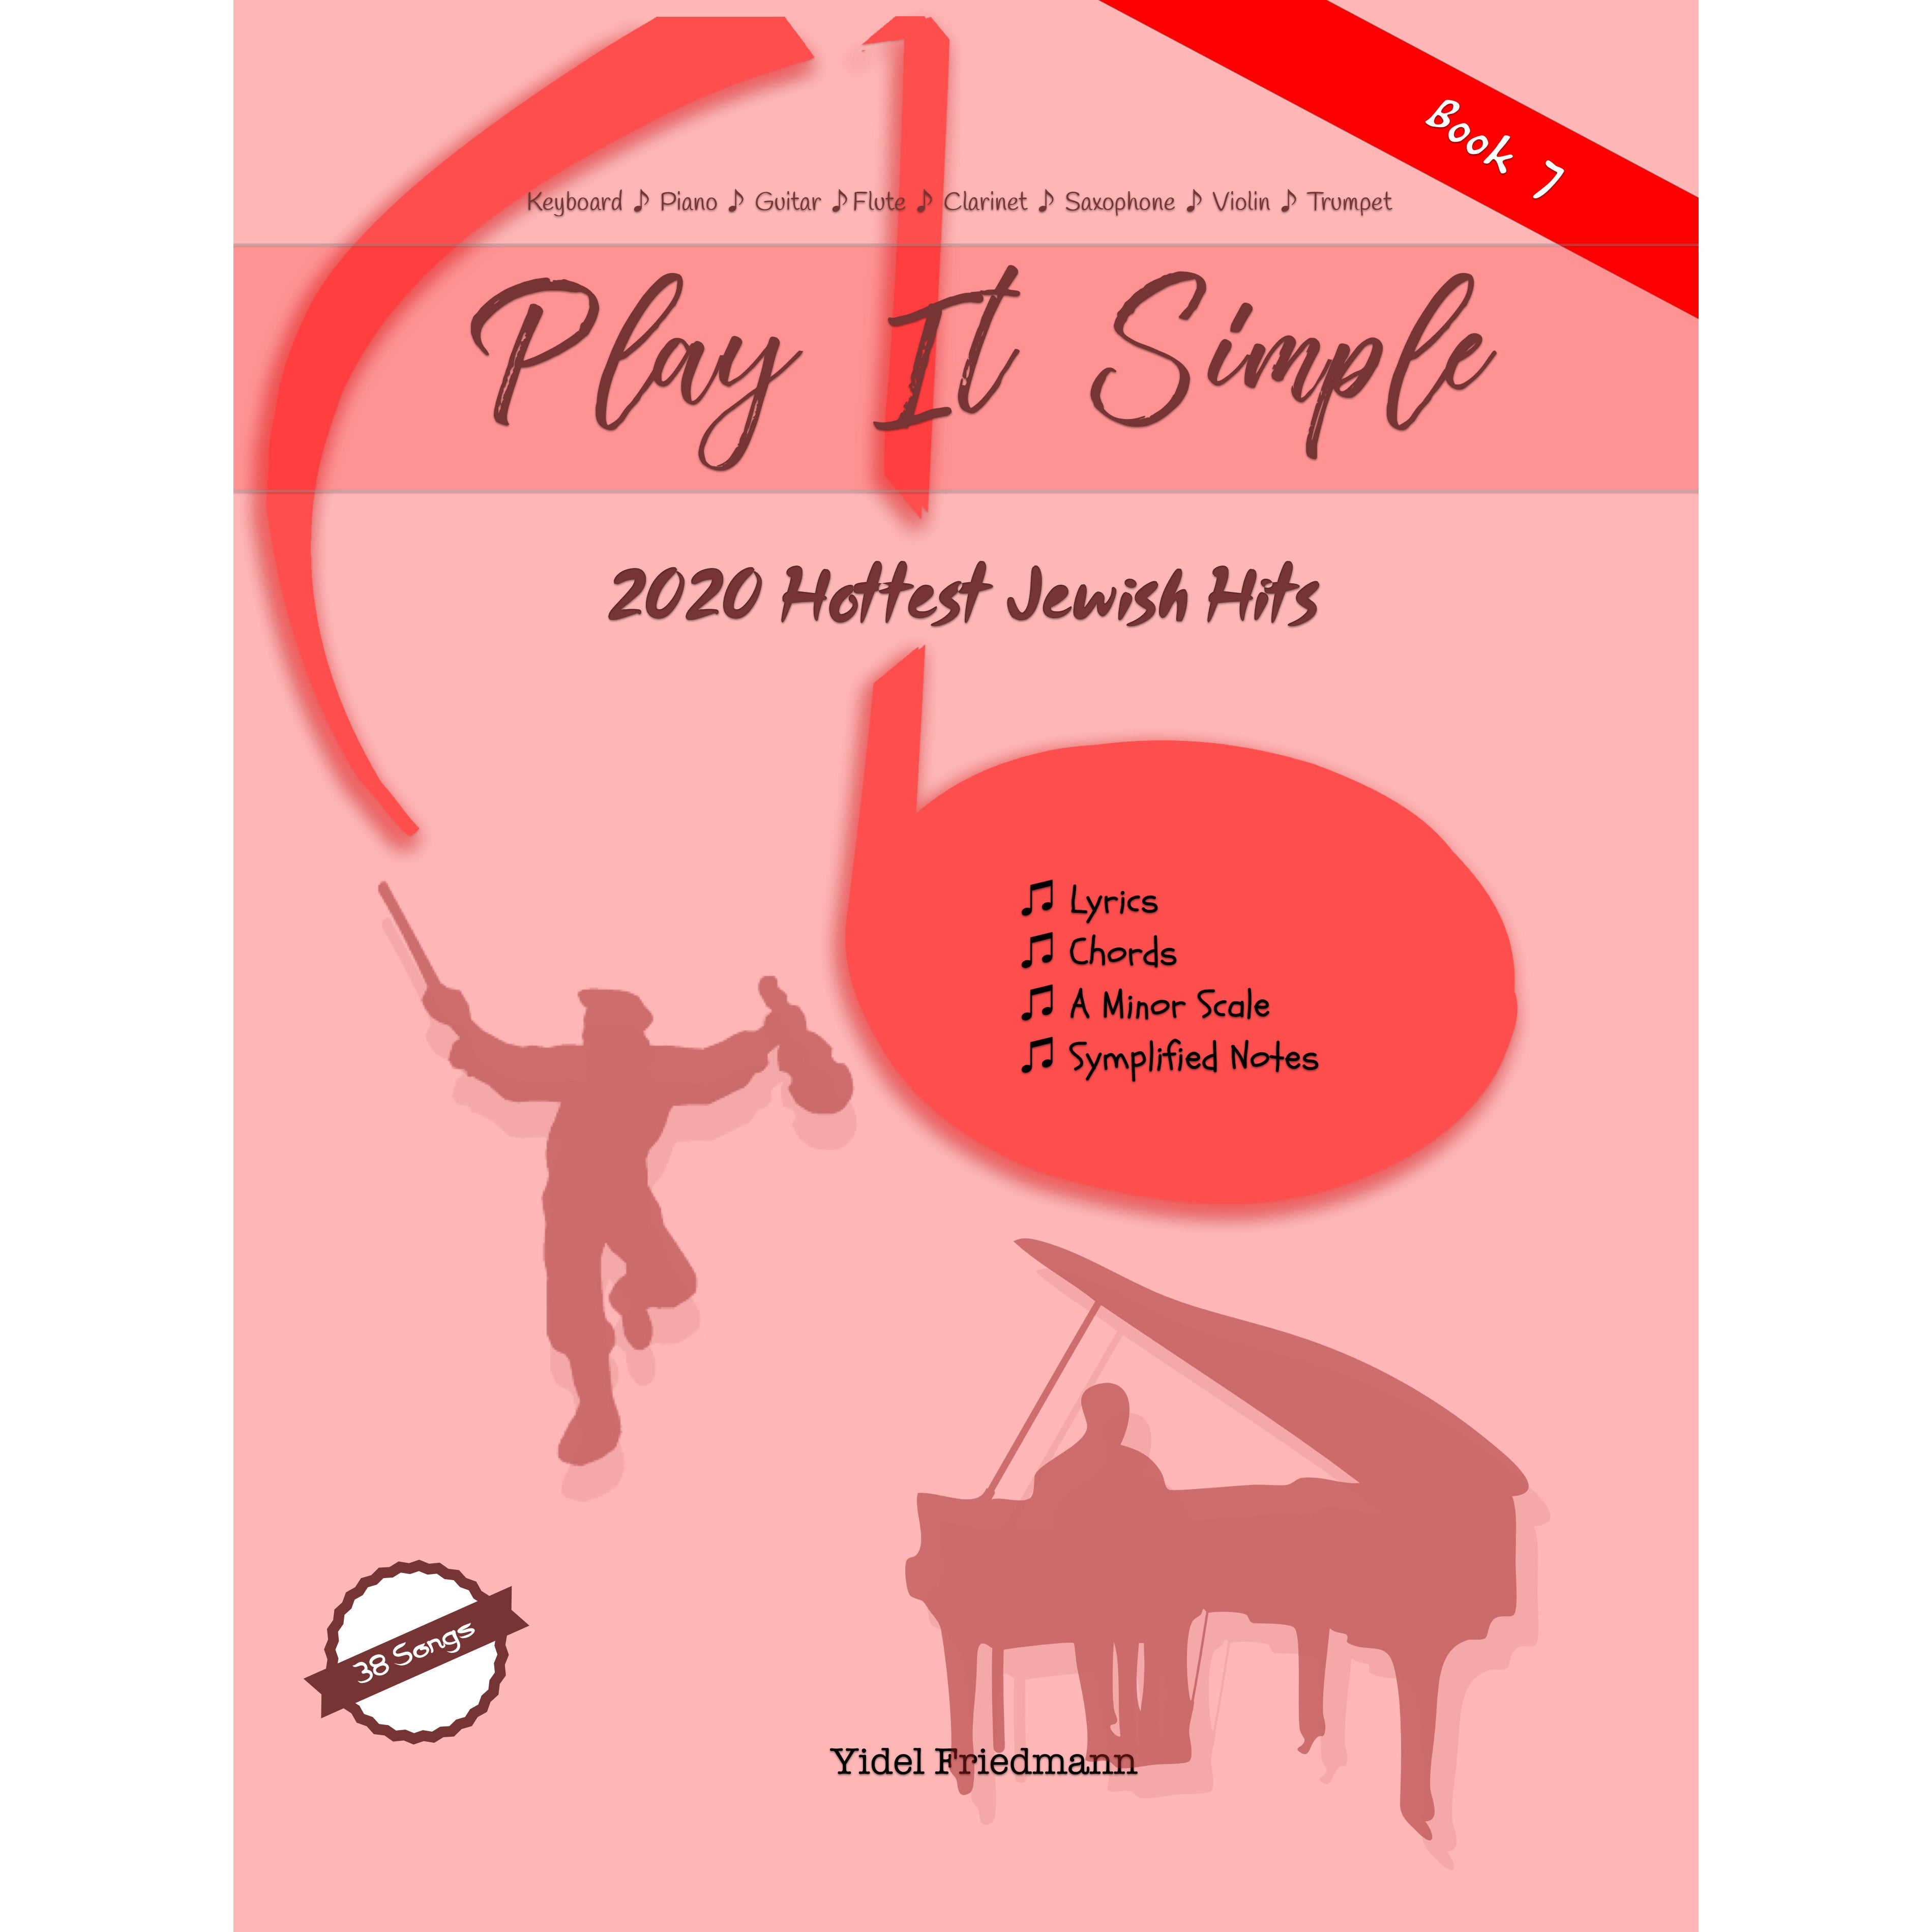 Play It Simple 2020 Hottest Jewish Hits Collection-Music Book-NoteWithGrace.com